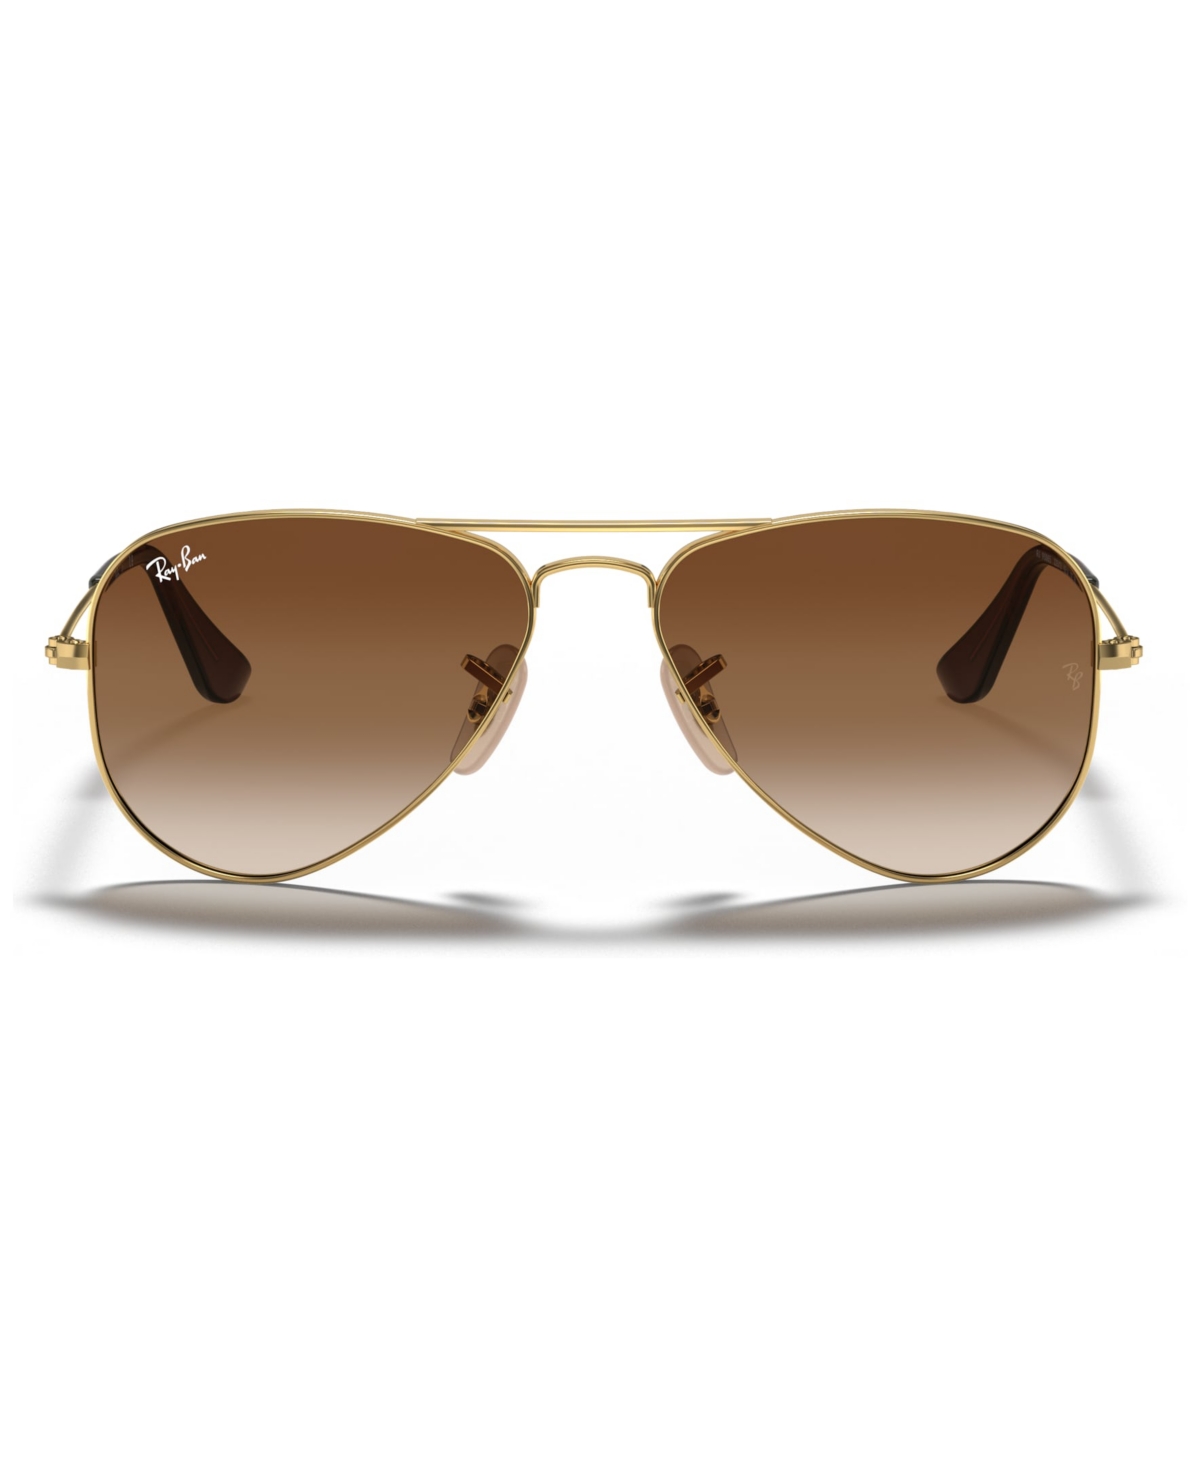 Ray-ban Jr . Kids Sunglasses, Rj9506s Aviator (ages 4-6) In Gold,brown Gradient